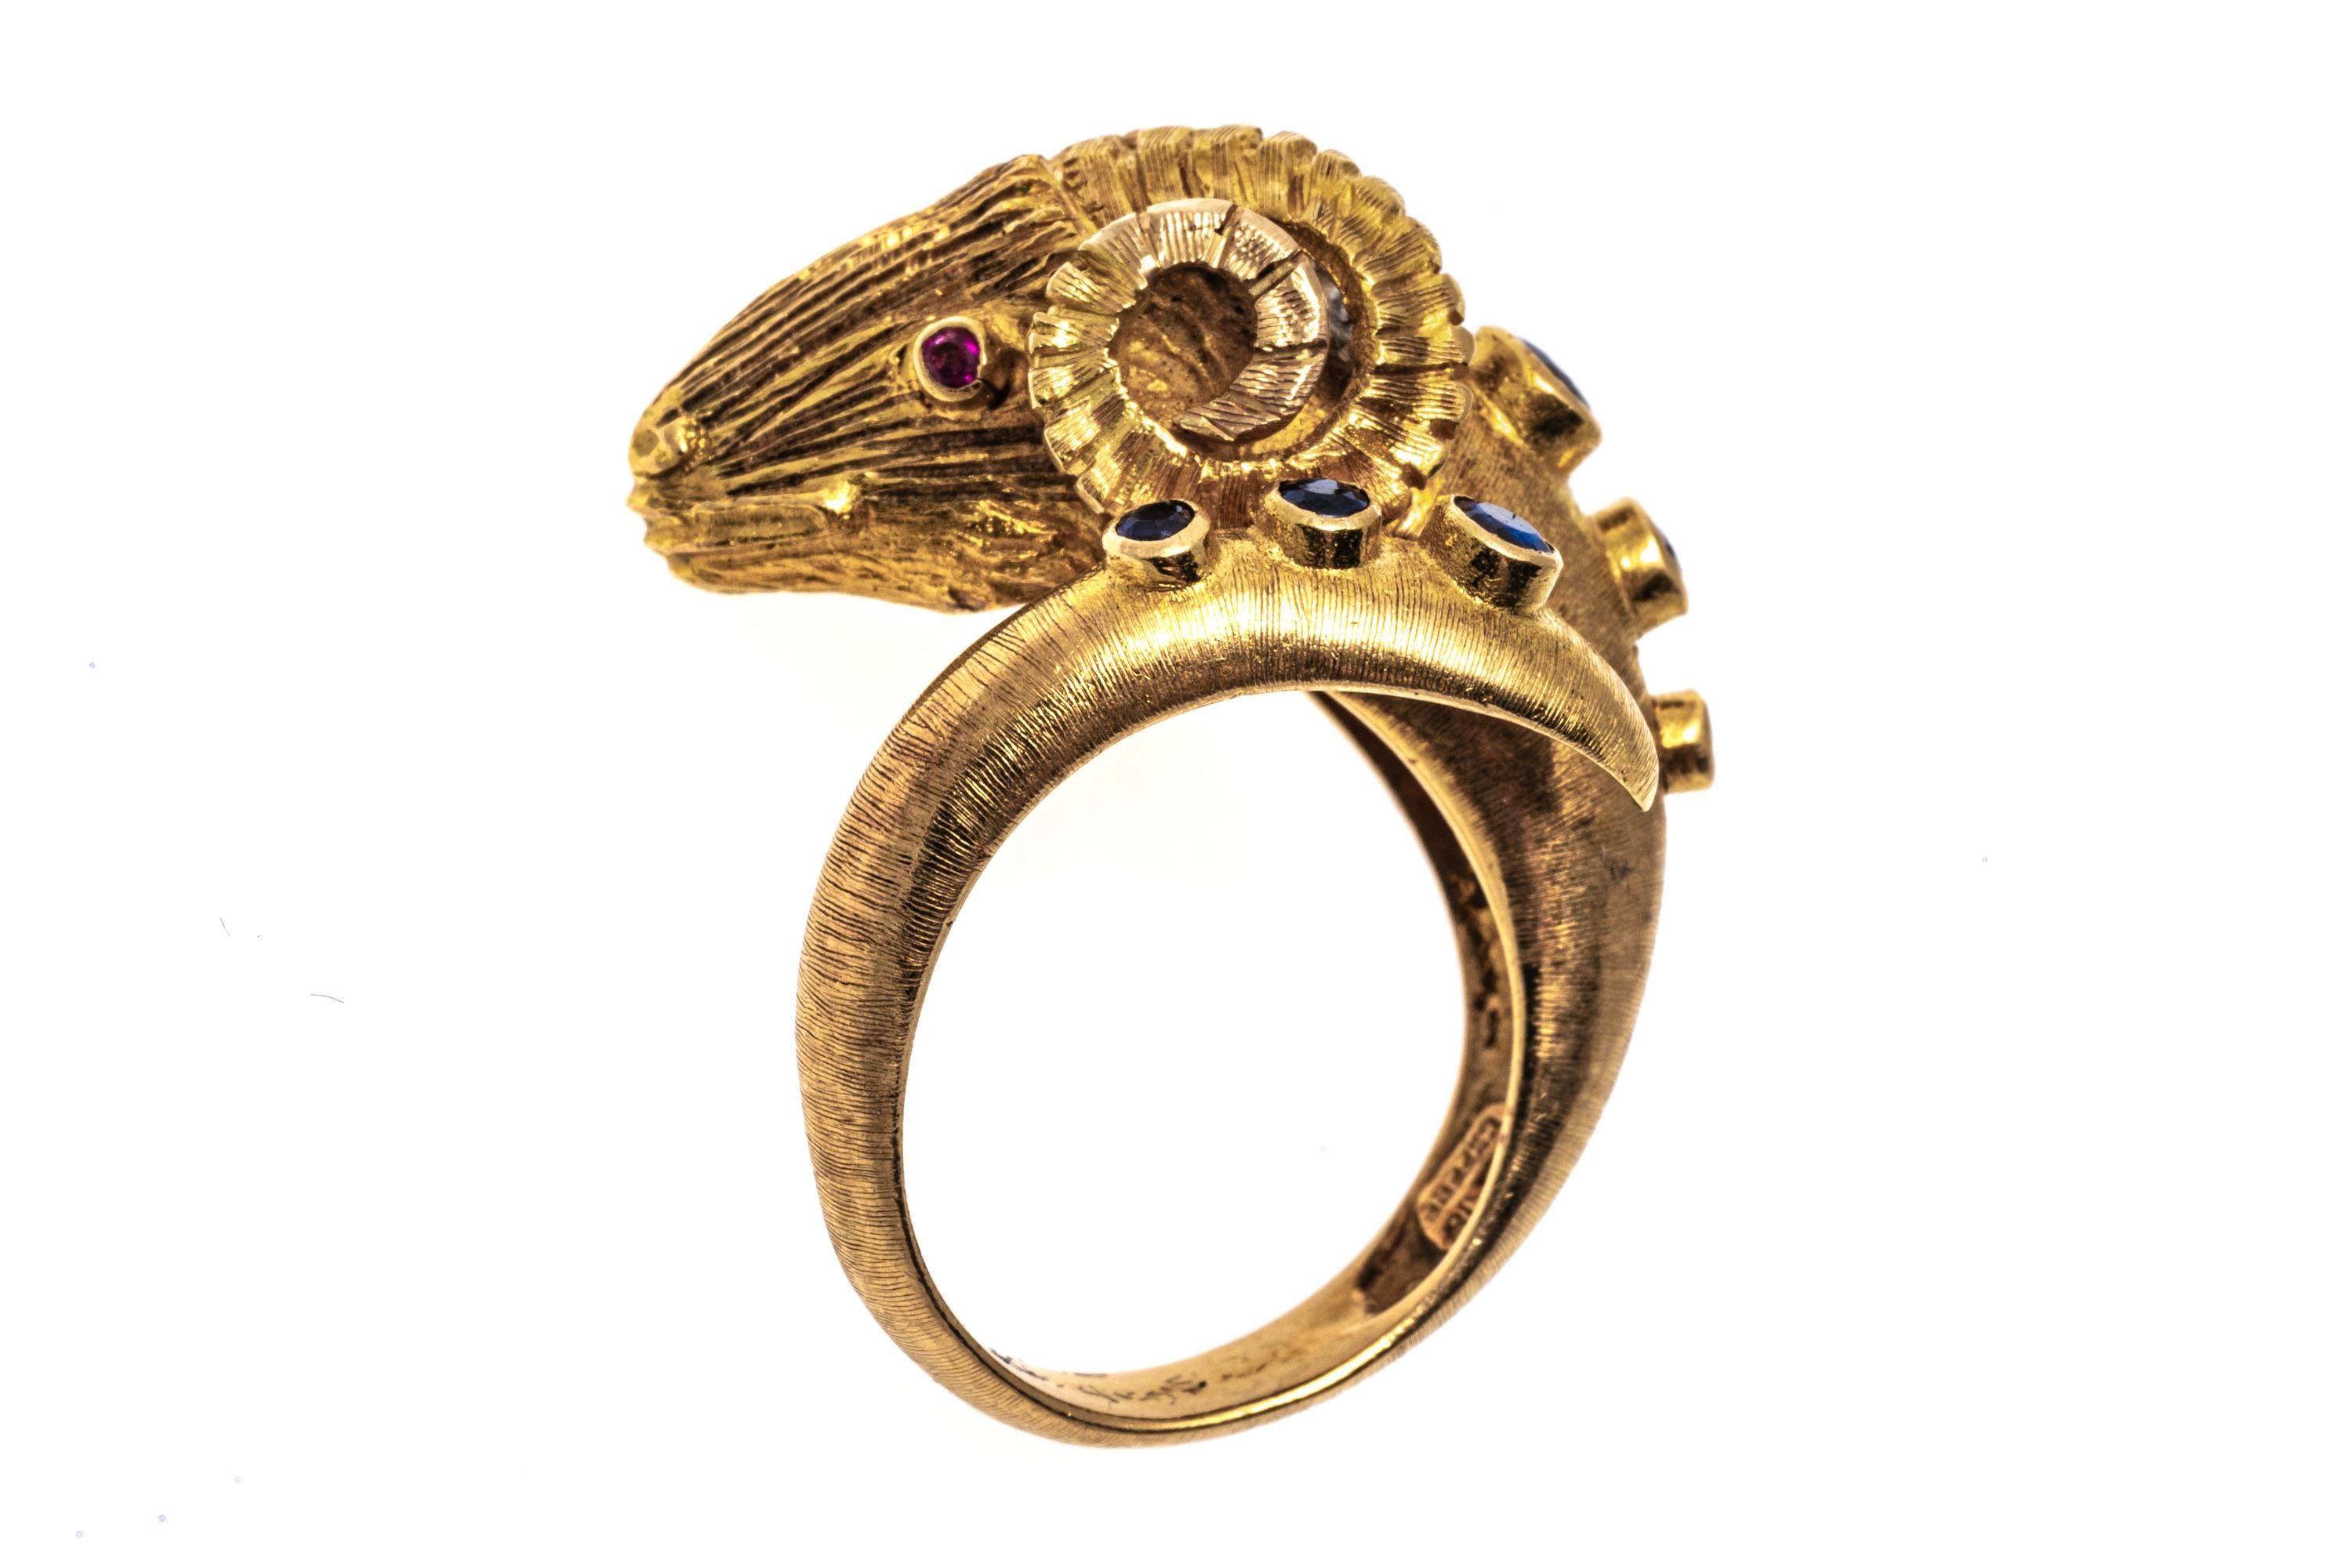 14k Yellow Gold Rams Head Ring With Sapphires, Rubies And Diamonds, Size 7-8 For Sale 2